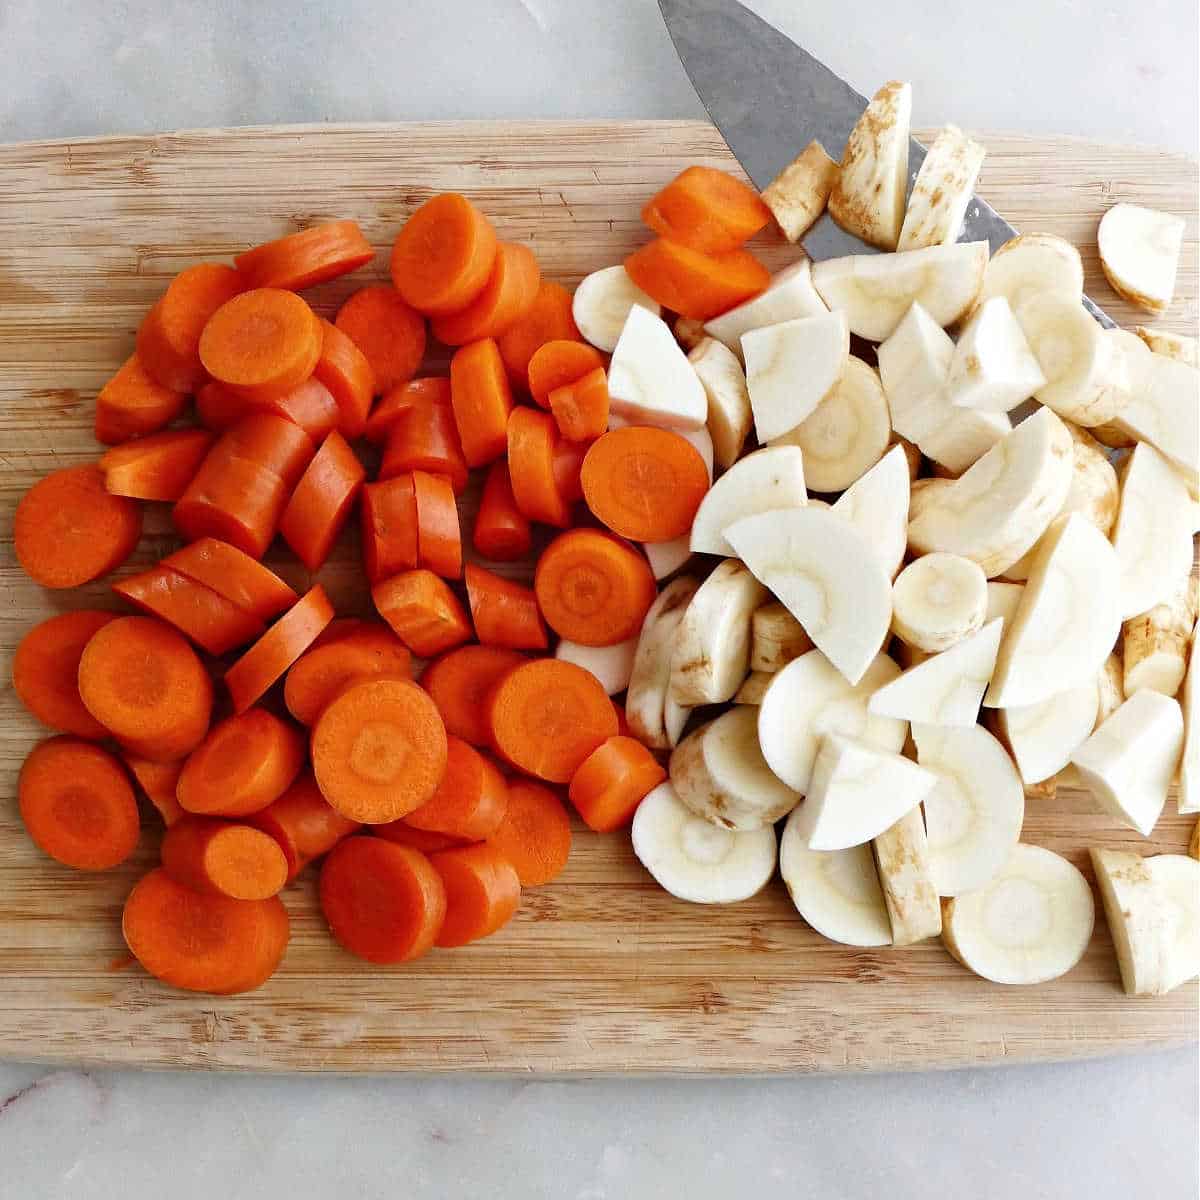 sliced carrot and parsnip coins on a bamboo cutting board with a knife